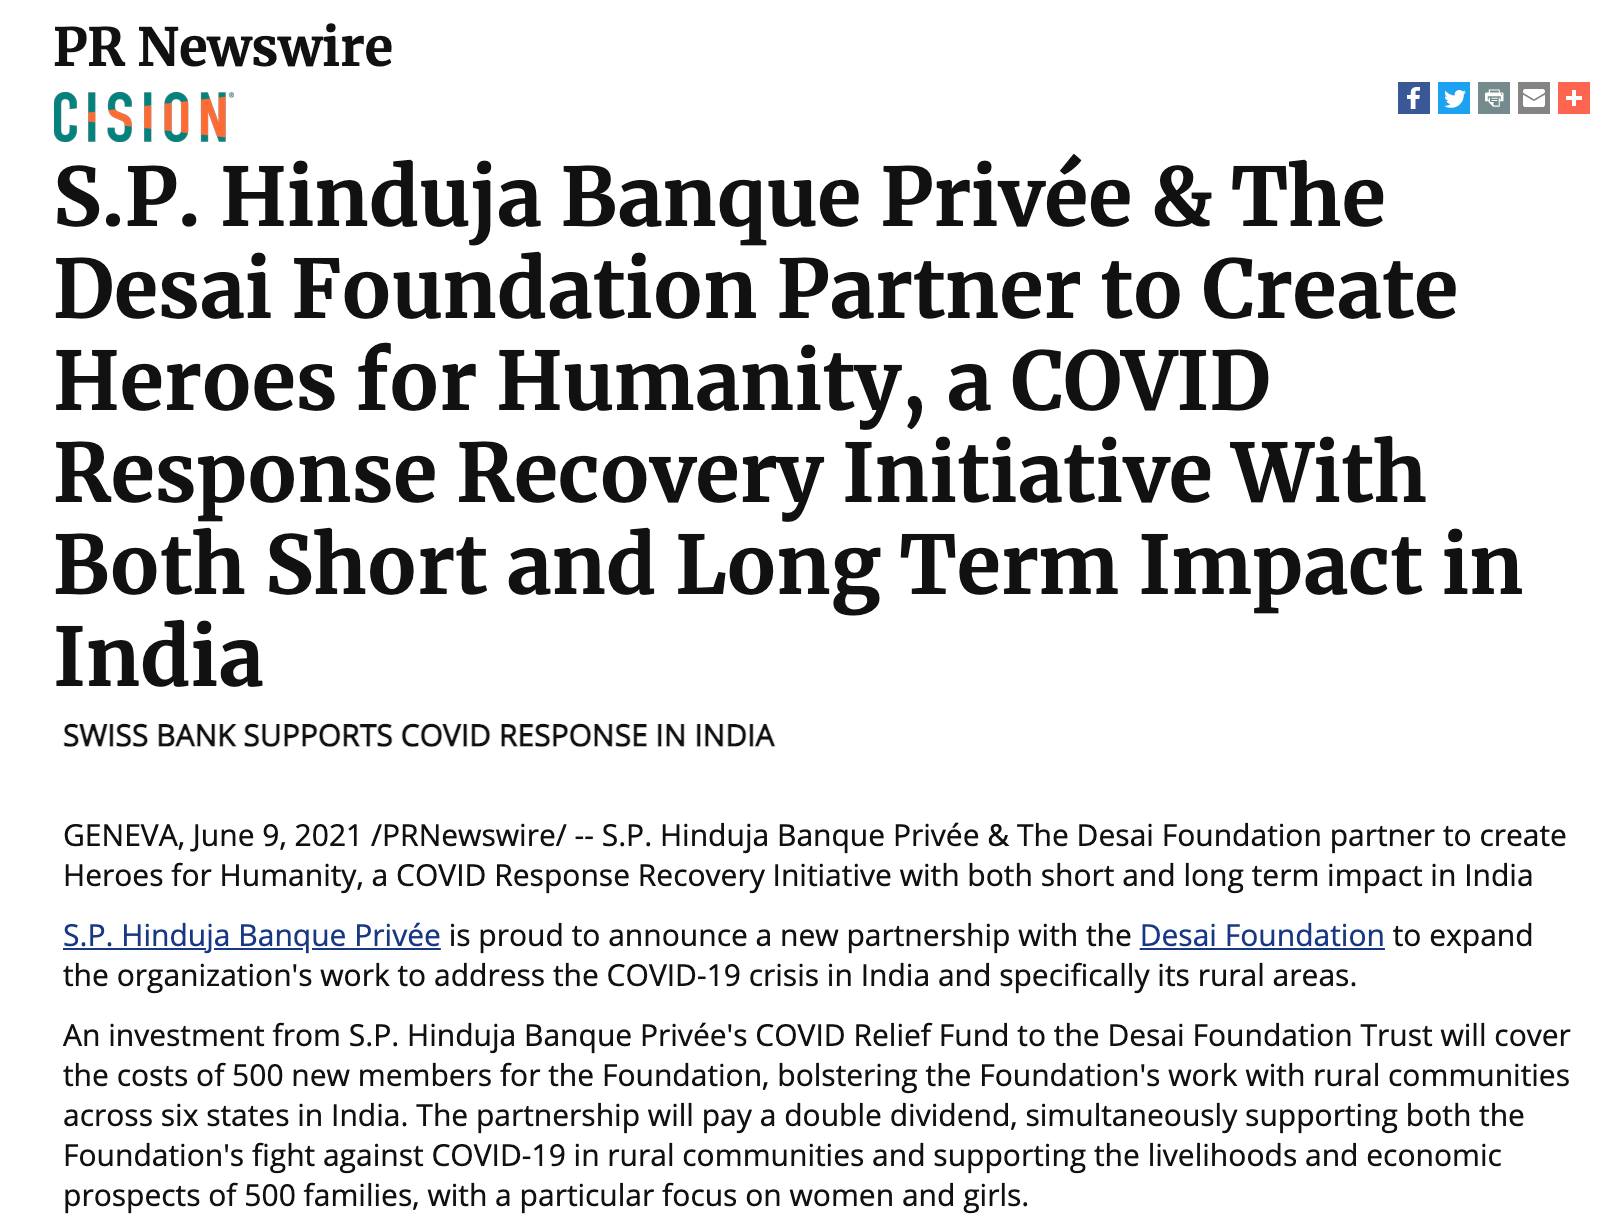 S.P. Hinduja Banque Privée & The Desai Foundation Partner to Create Heroes for Humanity, a COVID Response Recovery Initiative With Both Short and Long Term Impact in India